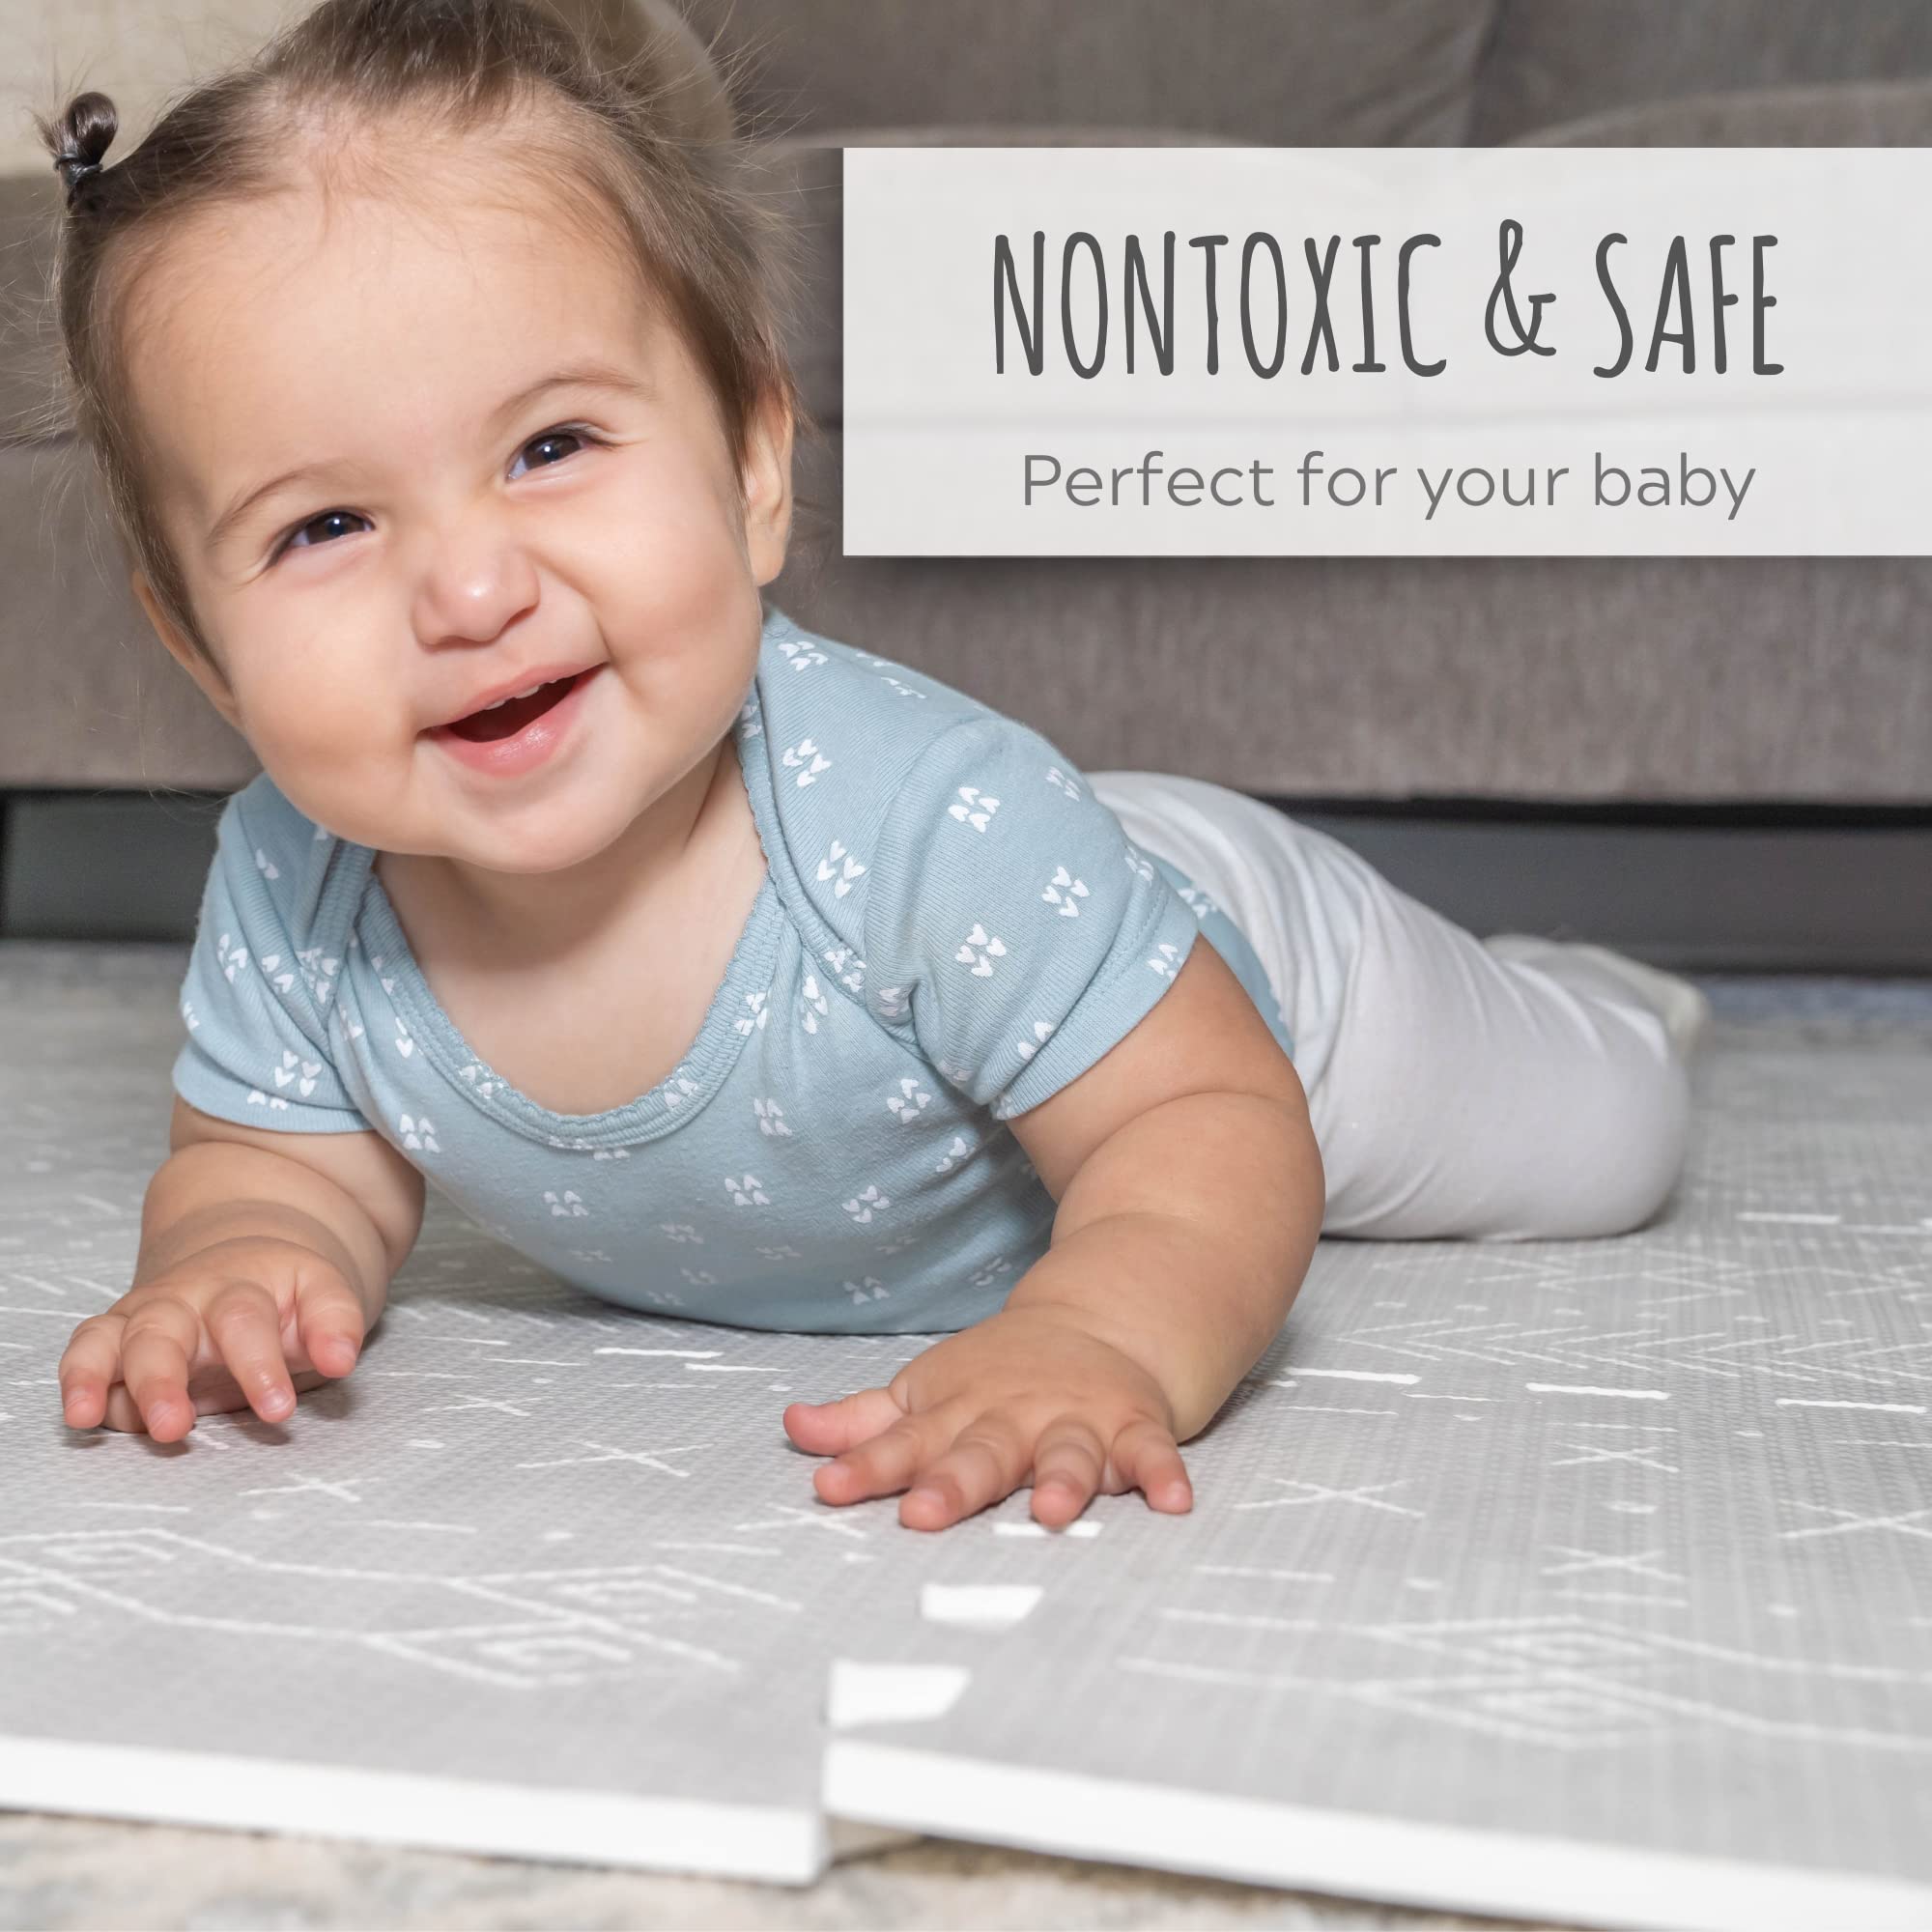 Stylish Baby Play Mat - Soft, Easy to Clean 5.6 x 4 ft. Floor Mat Creates A Safe Play Area for Your Baby Boy or Girl - The Perfect Modern Foam Playmat Fits Nicely with Your Kids Playroom Or Home Decor